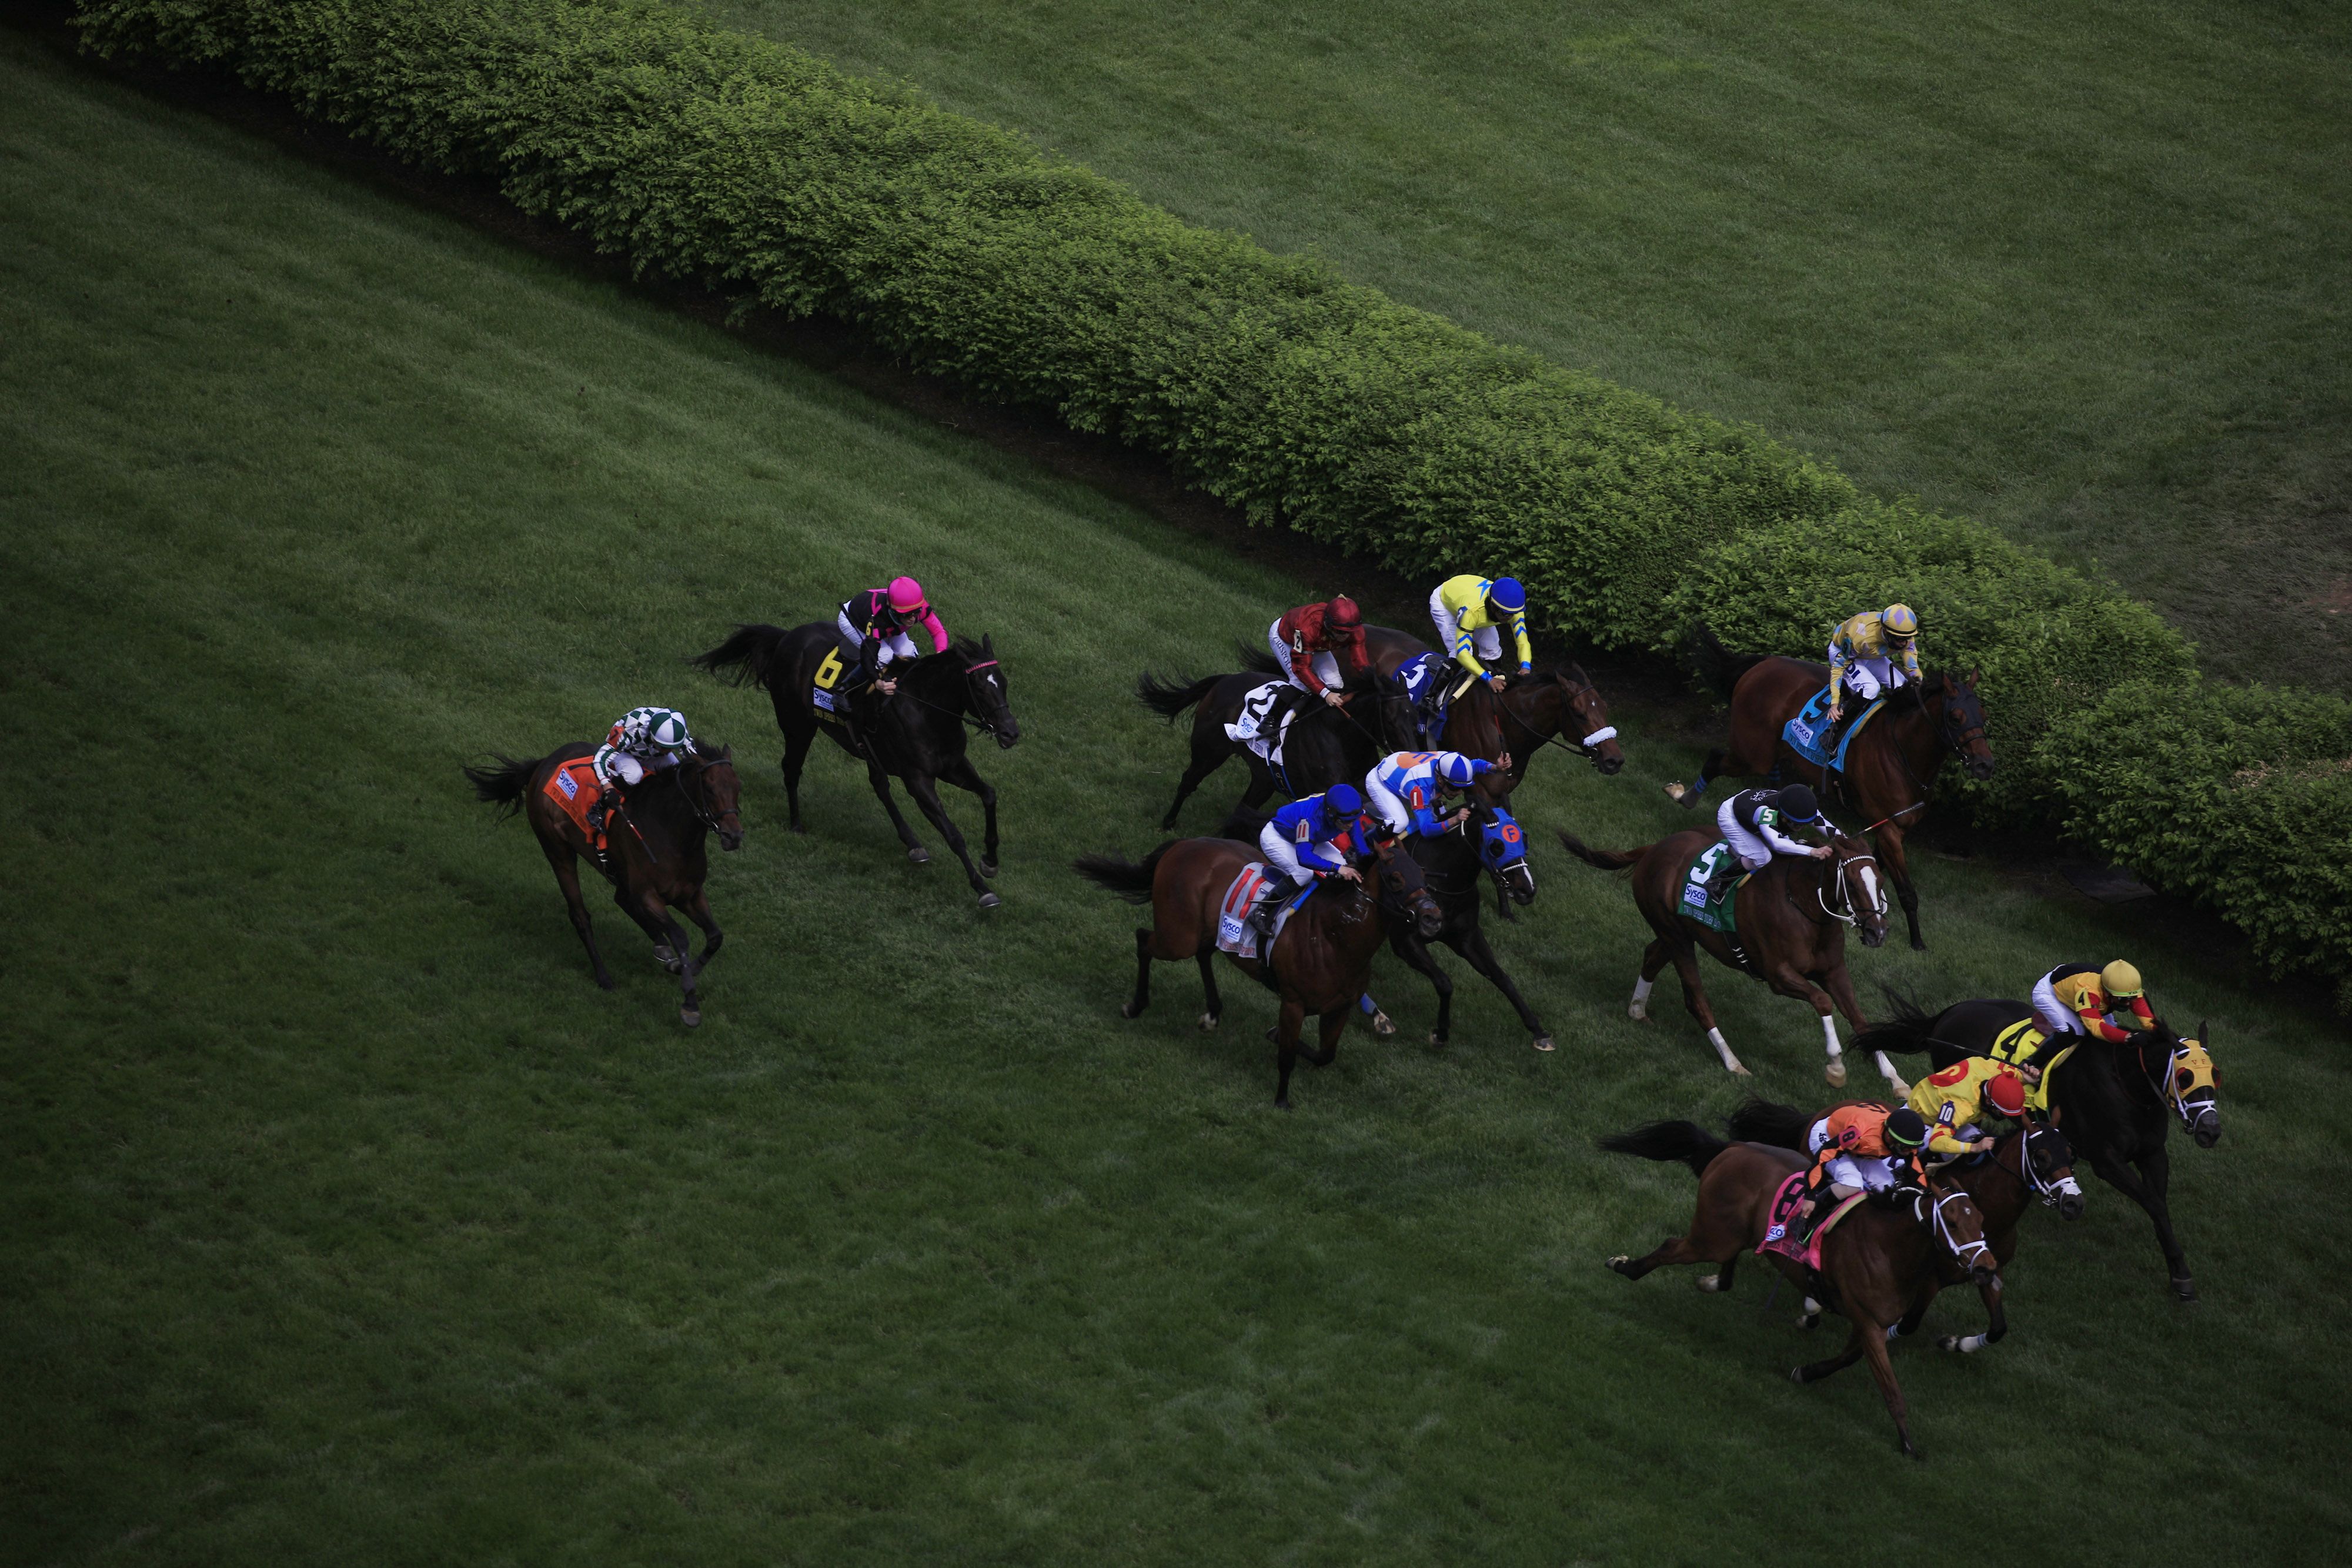 Thoroughbred racehorses compete in a turf race at Churchill Downs on April 30. 